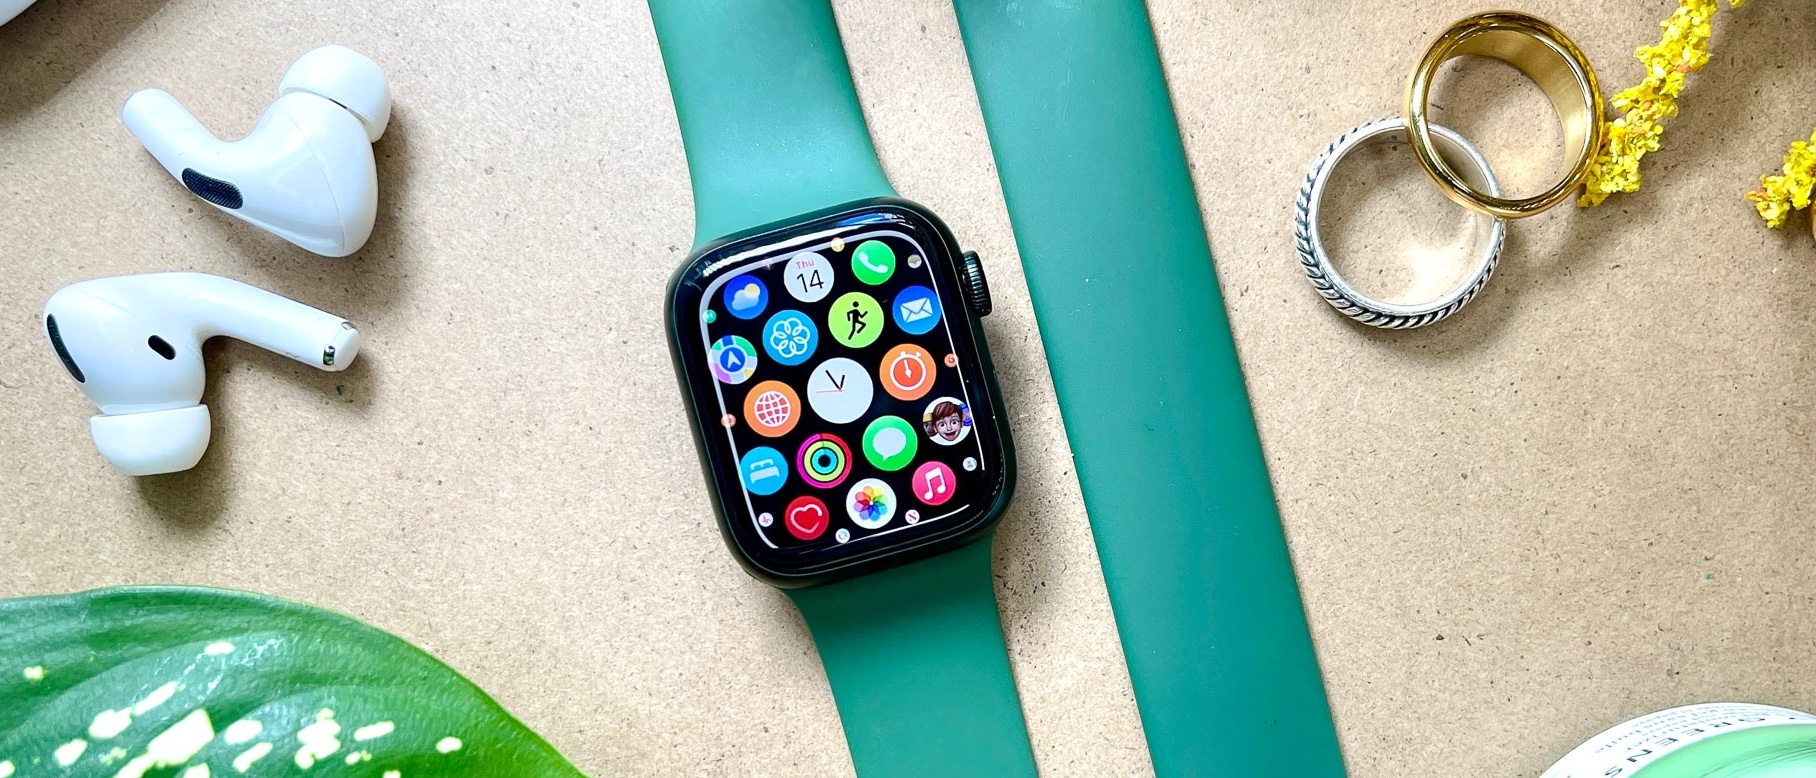 Set up and pair your Apple Watch with iPhone - Apple Support (IN)